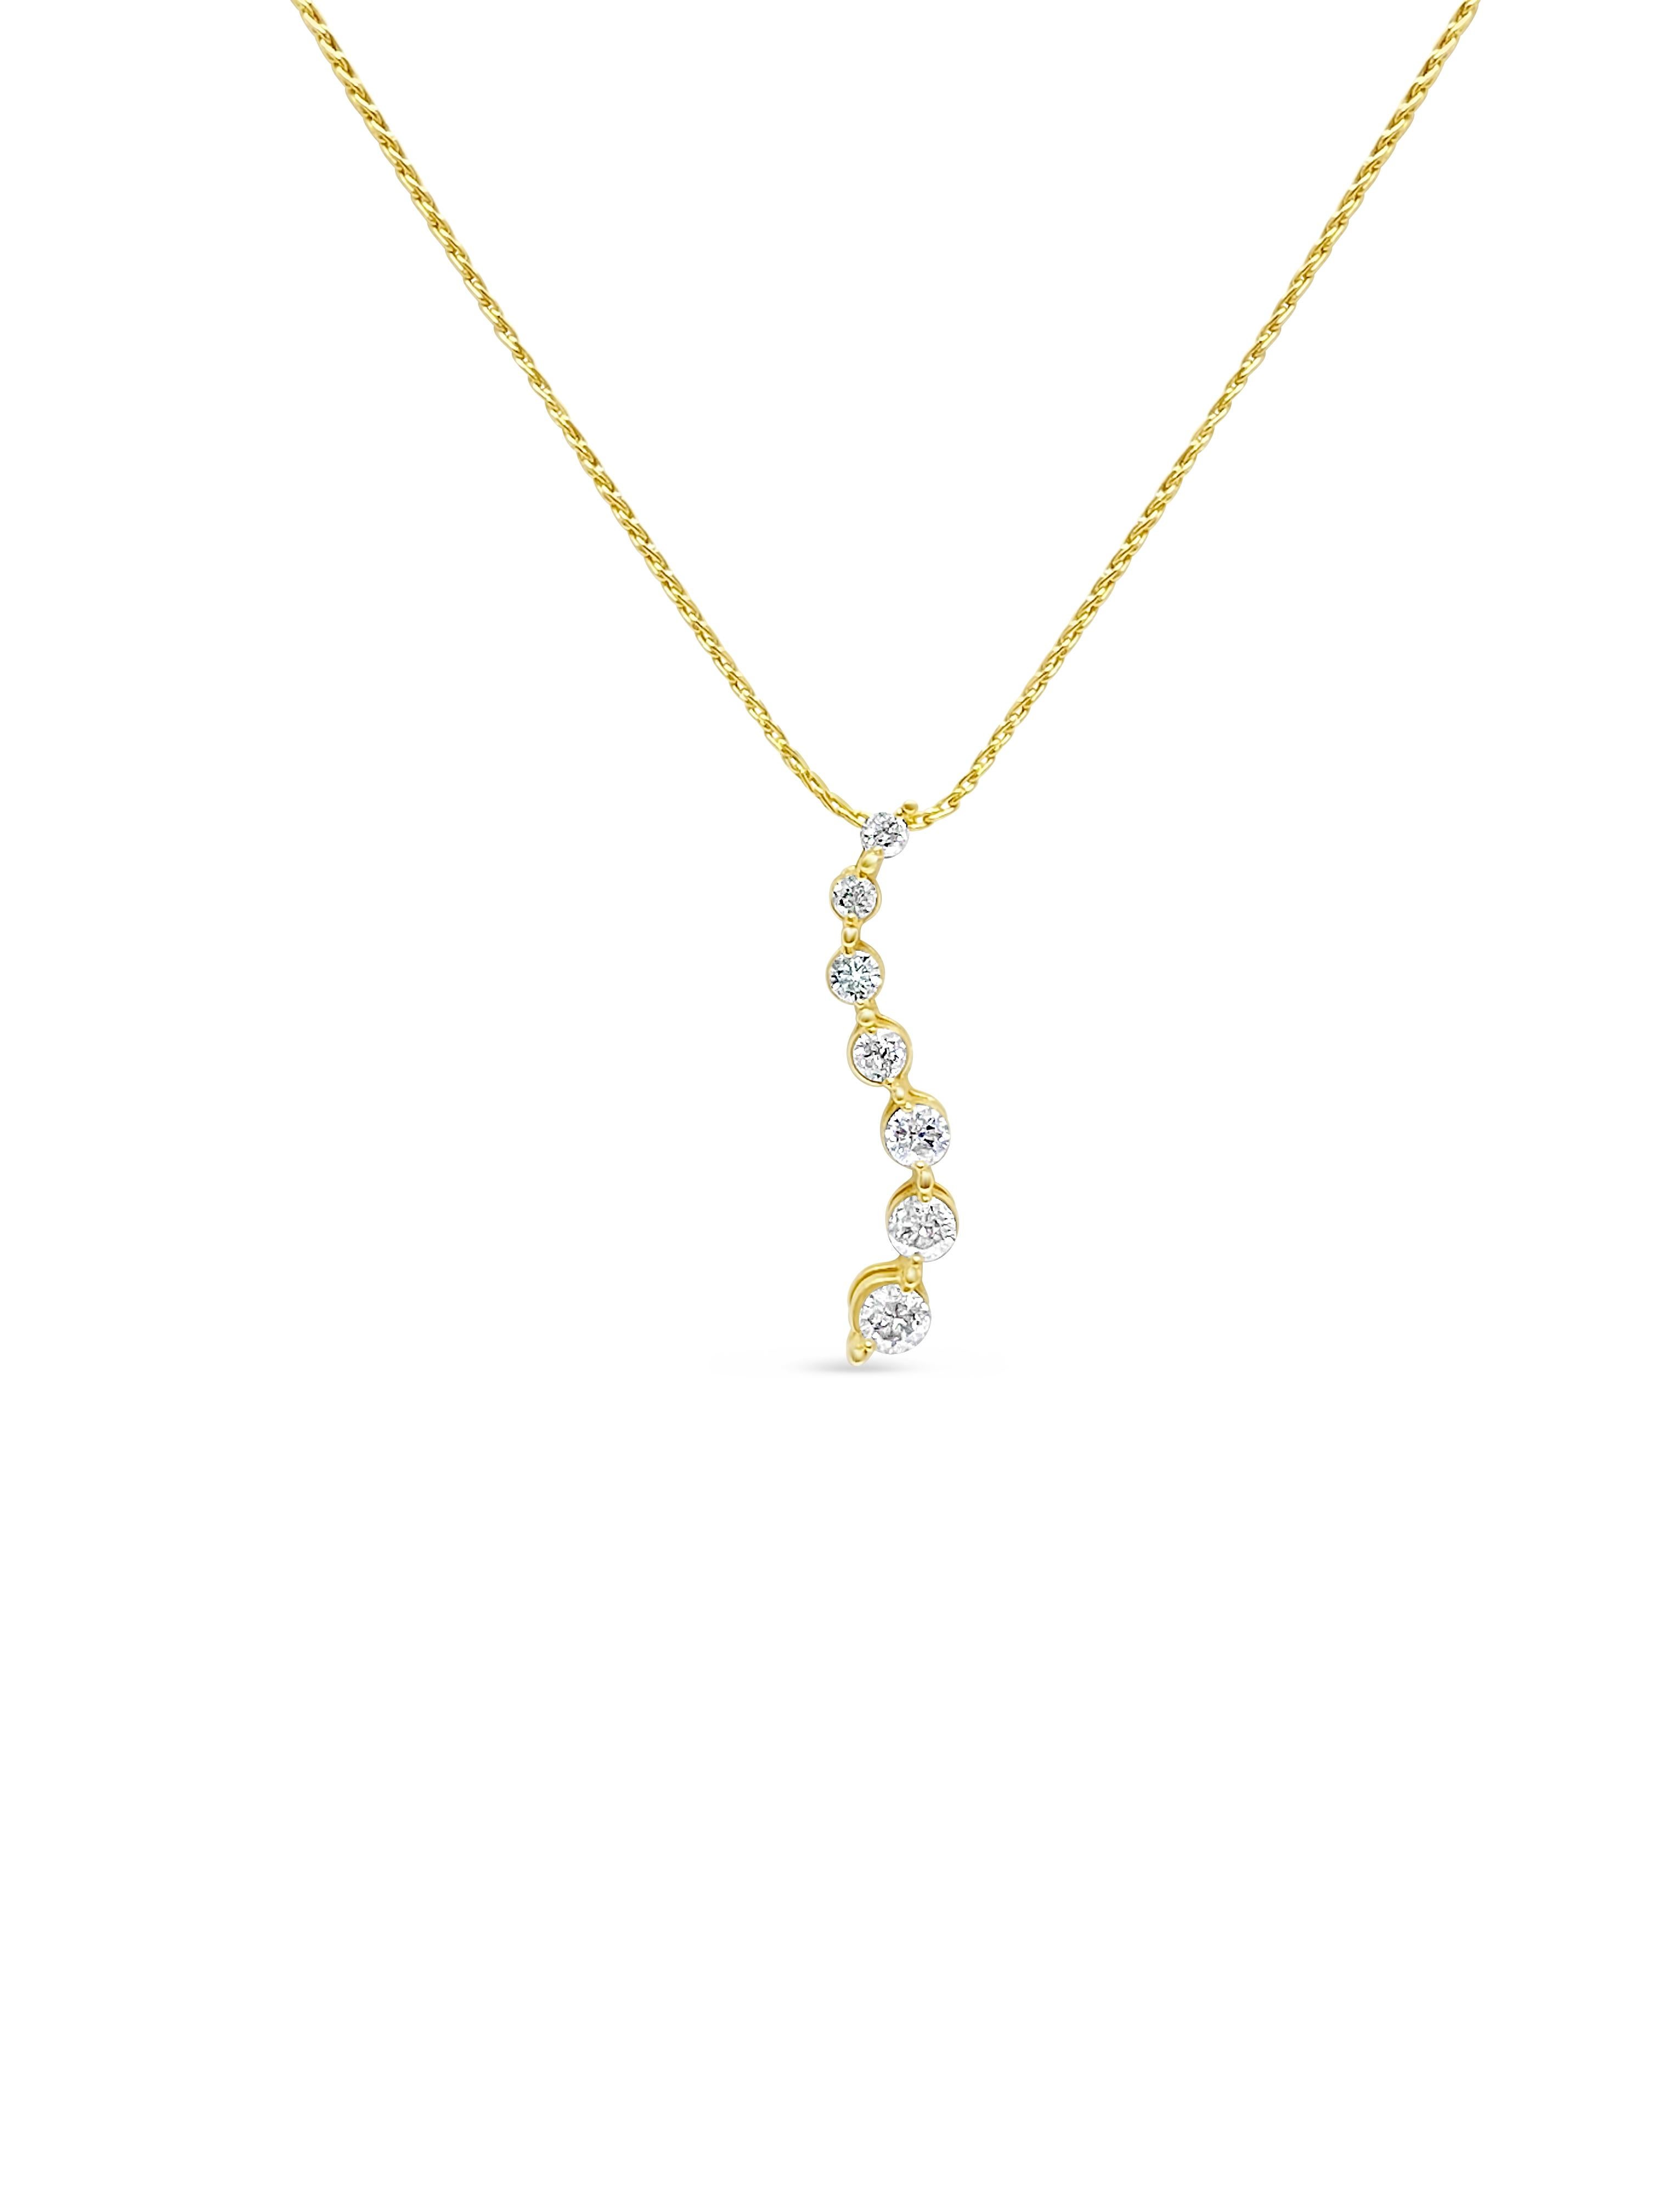 Crafted from 14k yellow gold, this elegant pendant necklace features a total of 0.80 carats of natural earth-mined diamonds. With VS clarity and F-G color, the diamonds exhibit exceptional brilliance and quality. The pendant comes with a 20